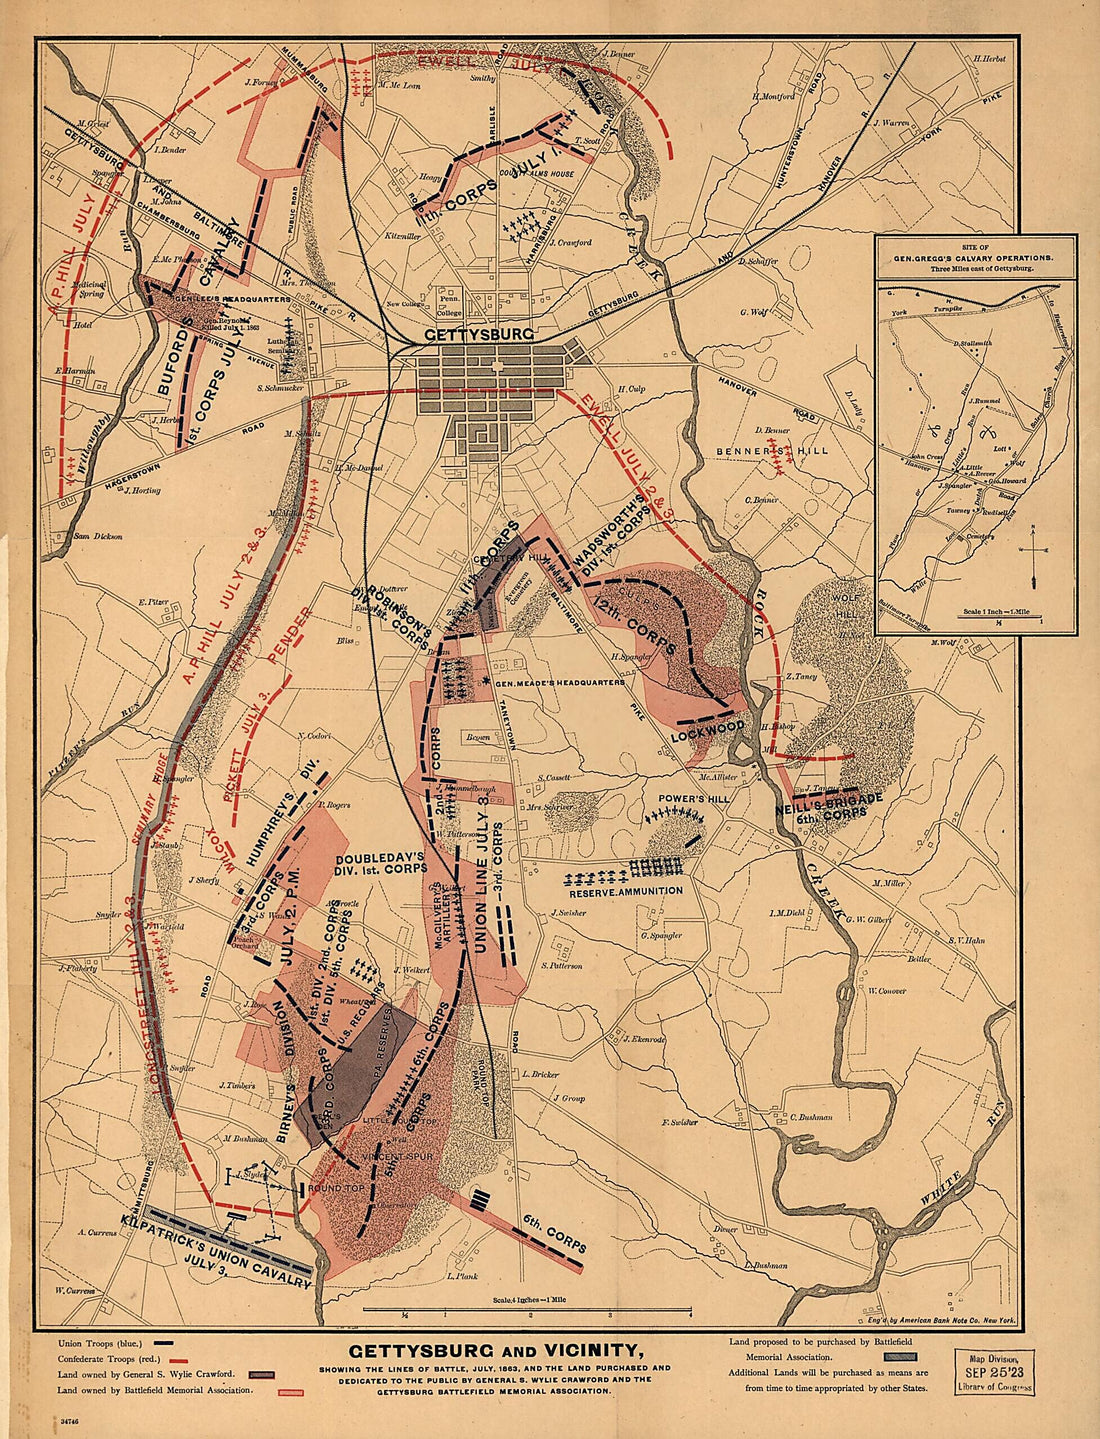 This old map of Gettysburg and Vicinity, Showing the Lines of Battle, July, from 1863, and the Land Purchased and Dedicated to the Public by General S. Wylie Crawford and the Gettysburg Battlefield Memorial Association was created by James T. (James Thom